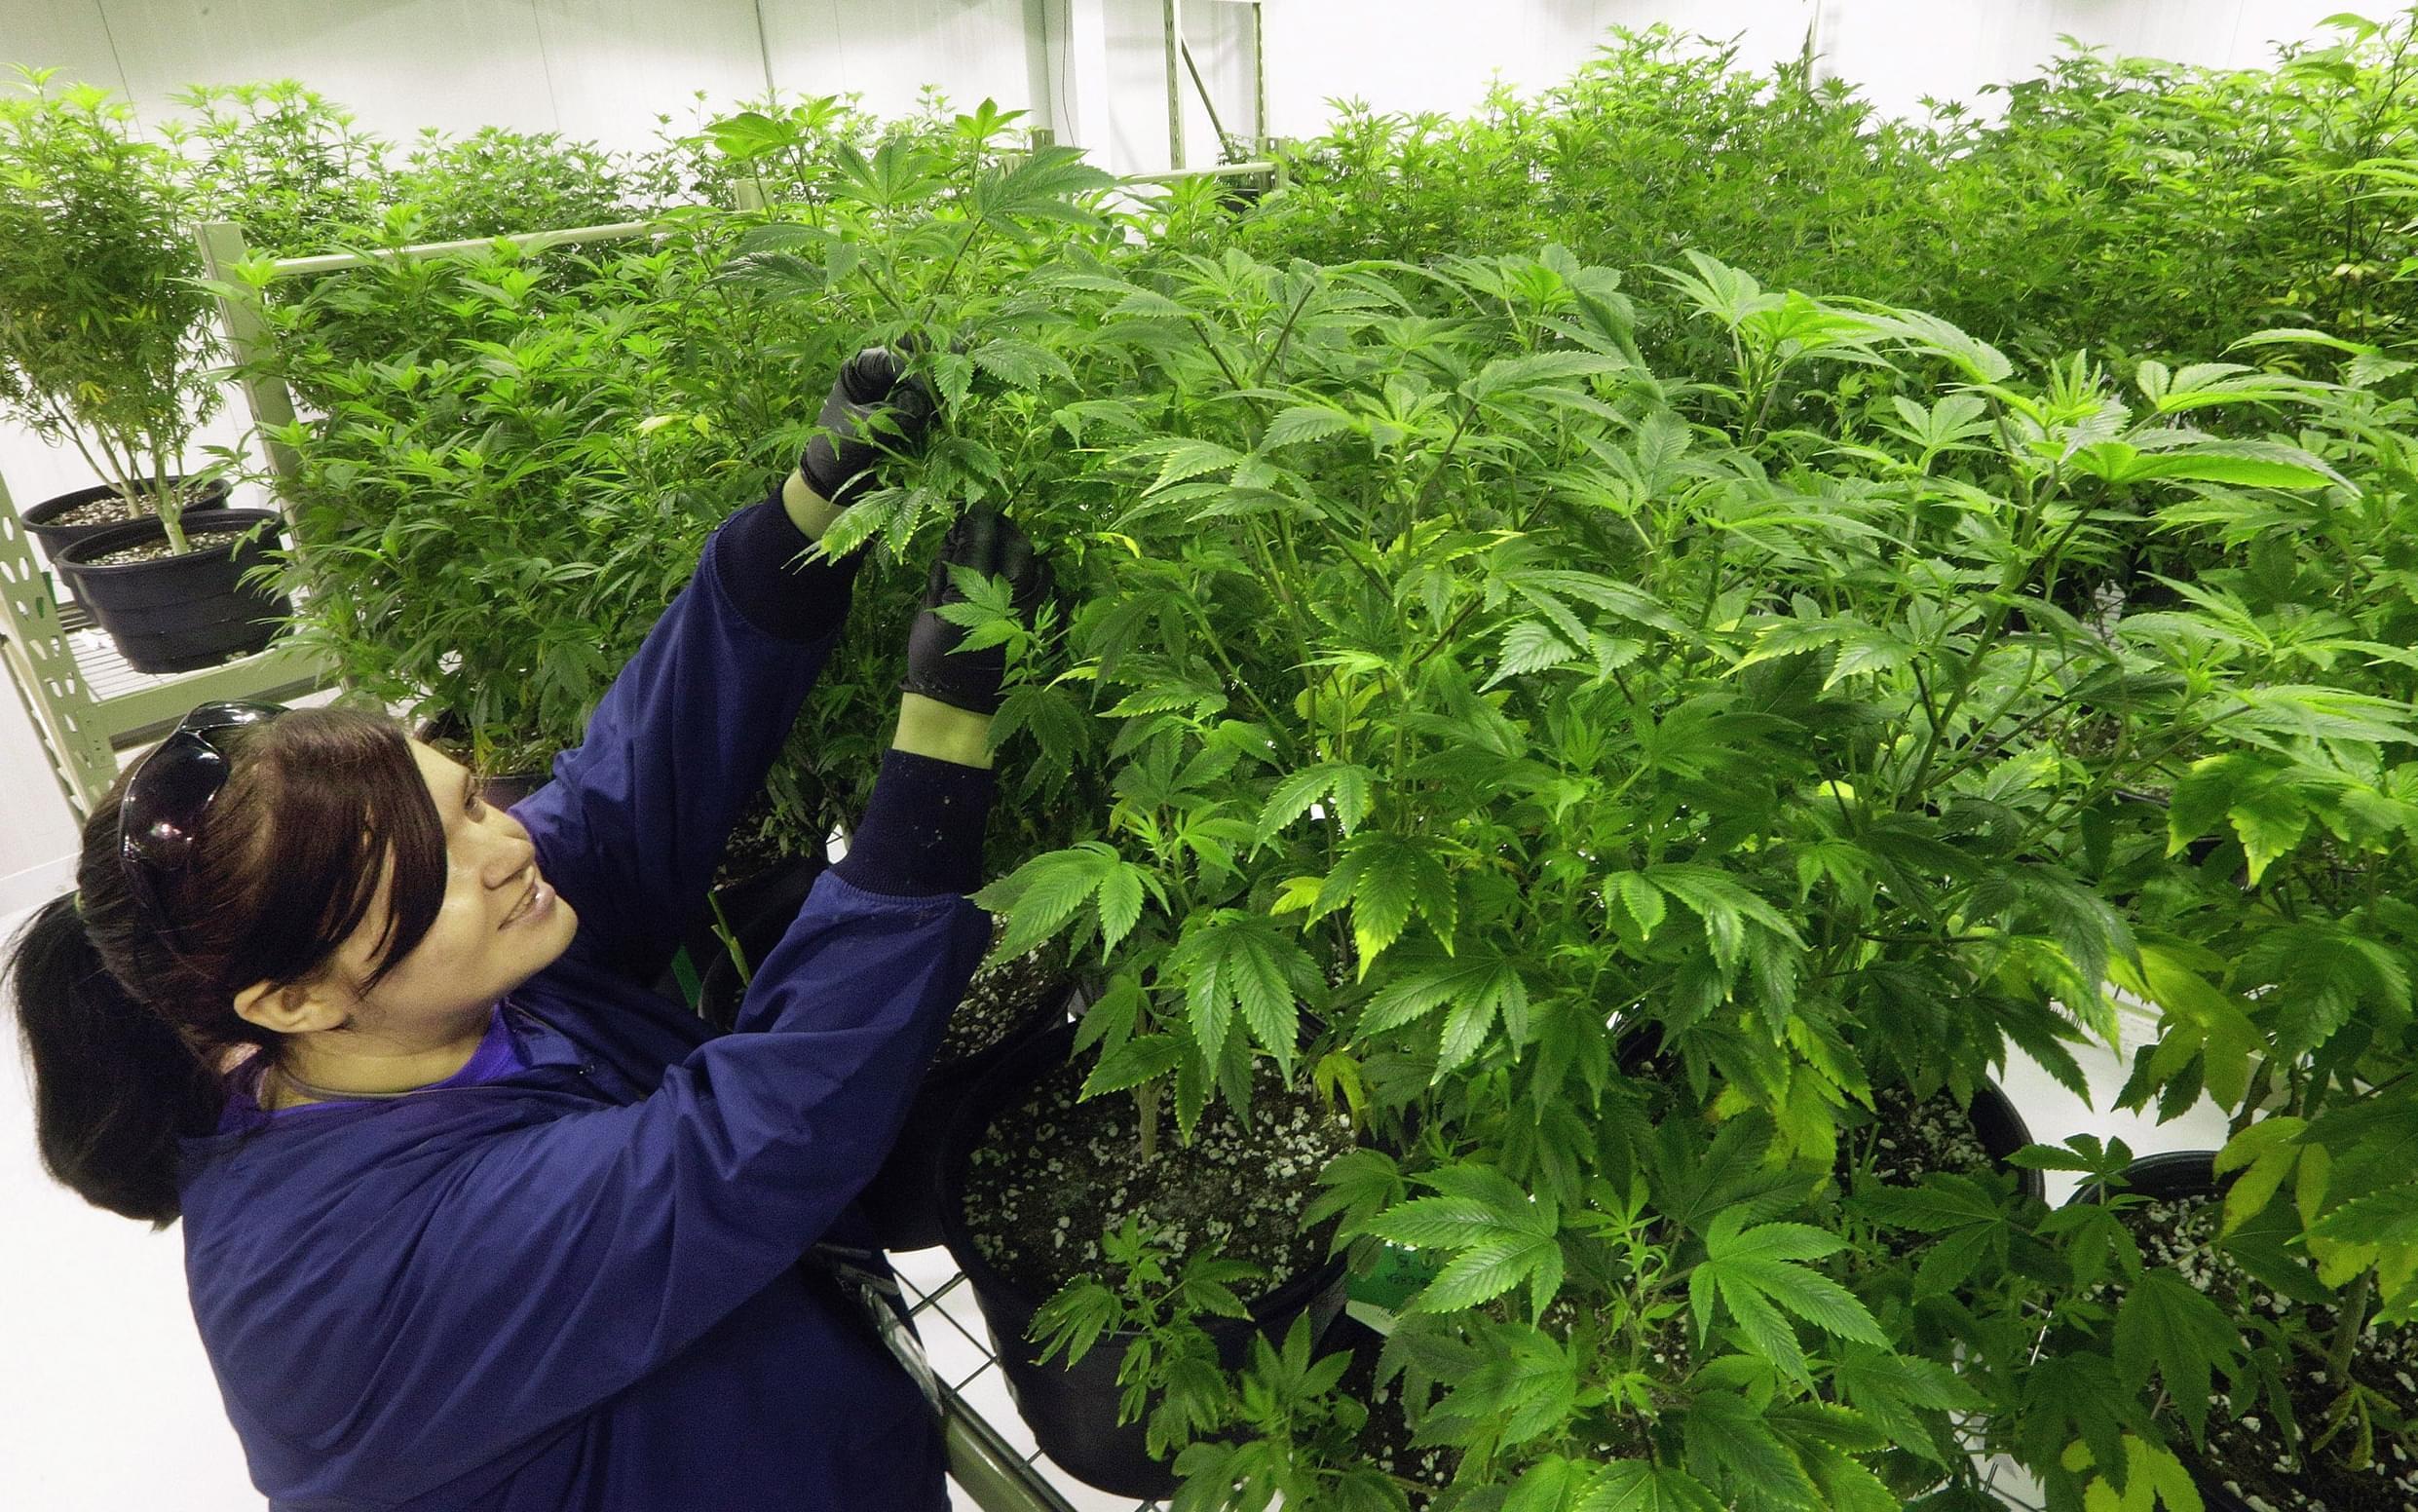 In this Sept. 15, 2015 file photo, Ashley Thompson inspects marijuana plants inside the "Mother Room" at the Ataraxia medical marijuana cultivation center in Albion, Ill.